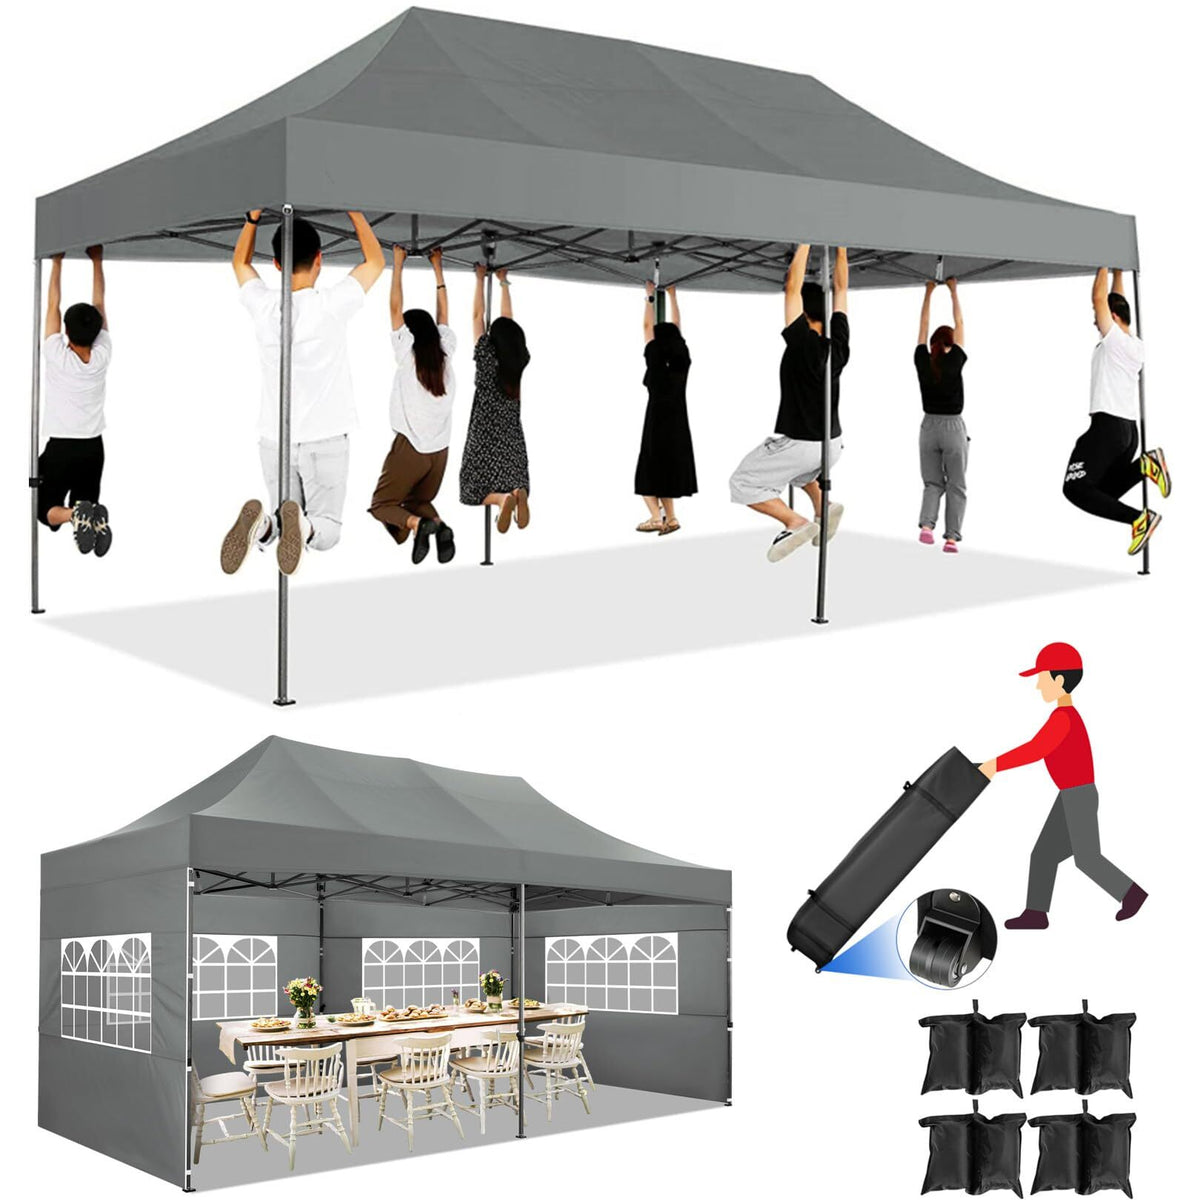 COBIZI 10x20 Heavy Duty Pop up Canopy Tent with 6 sidewalls Easy Up Commercial Outdoor Canopy,Gray